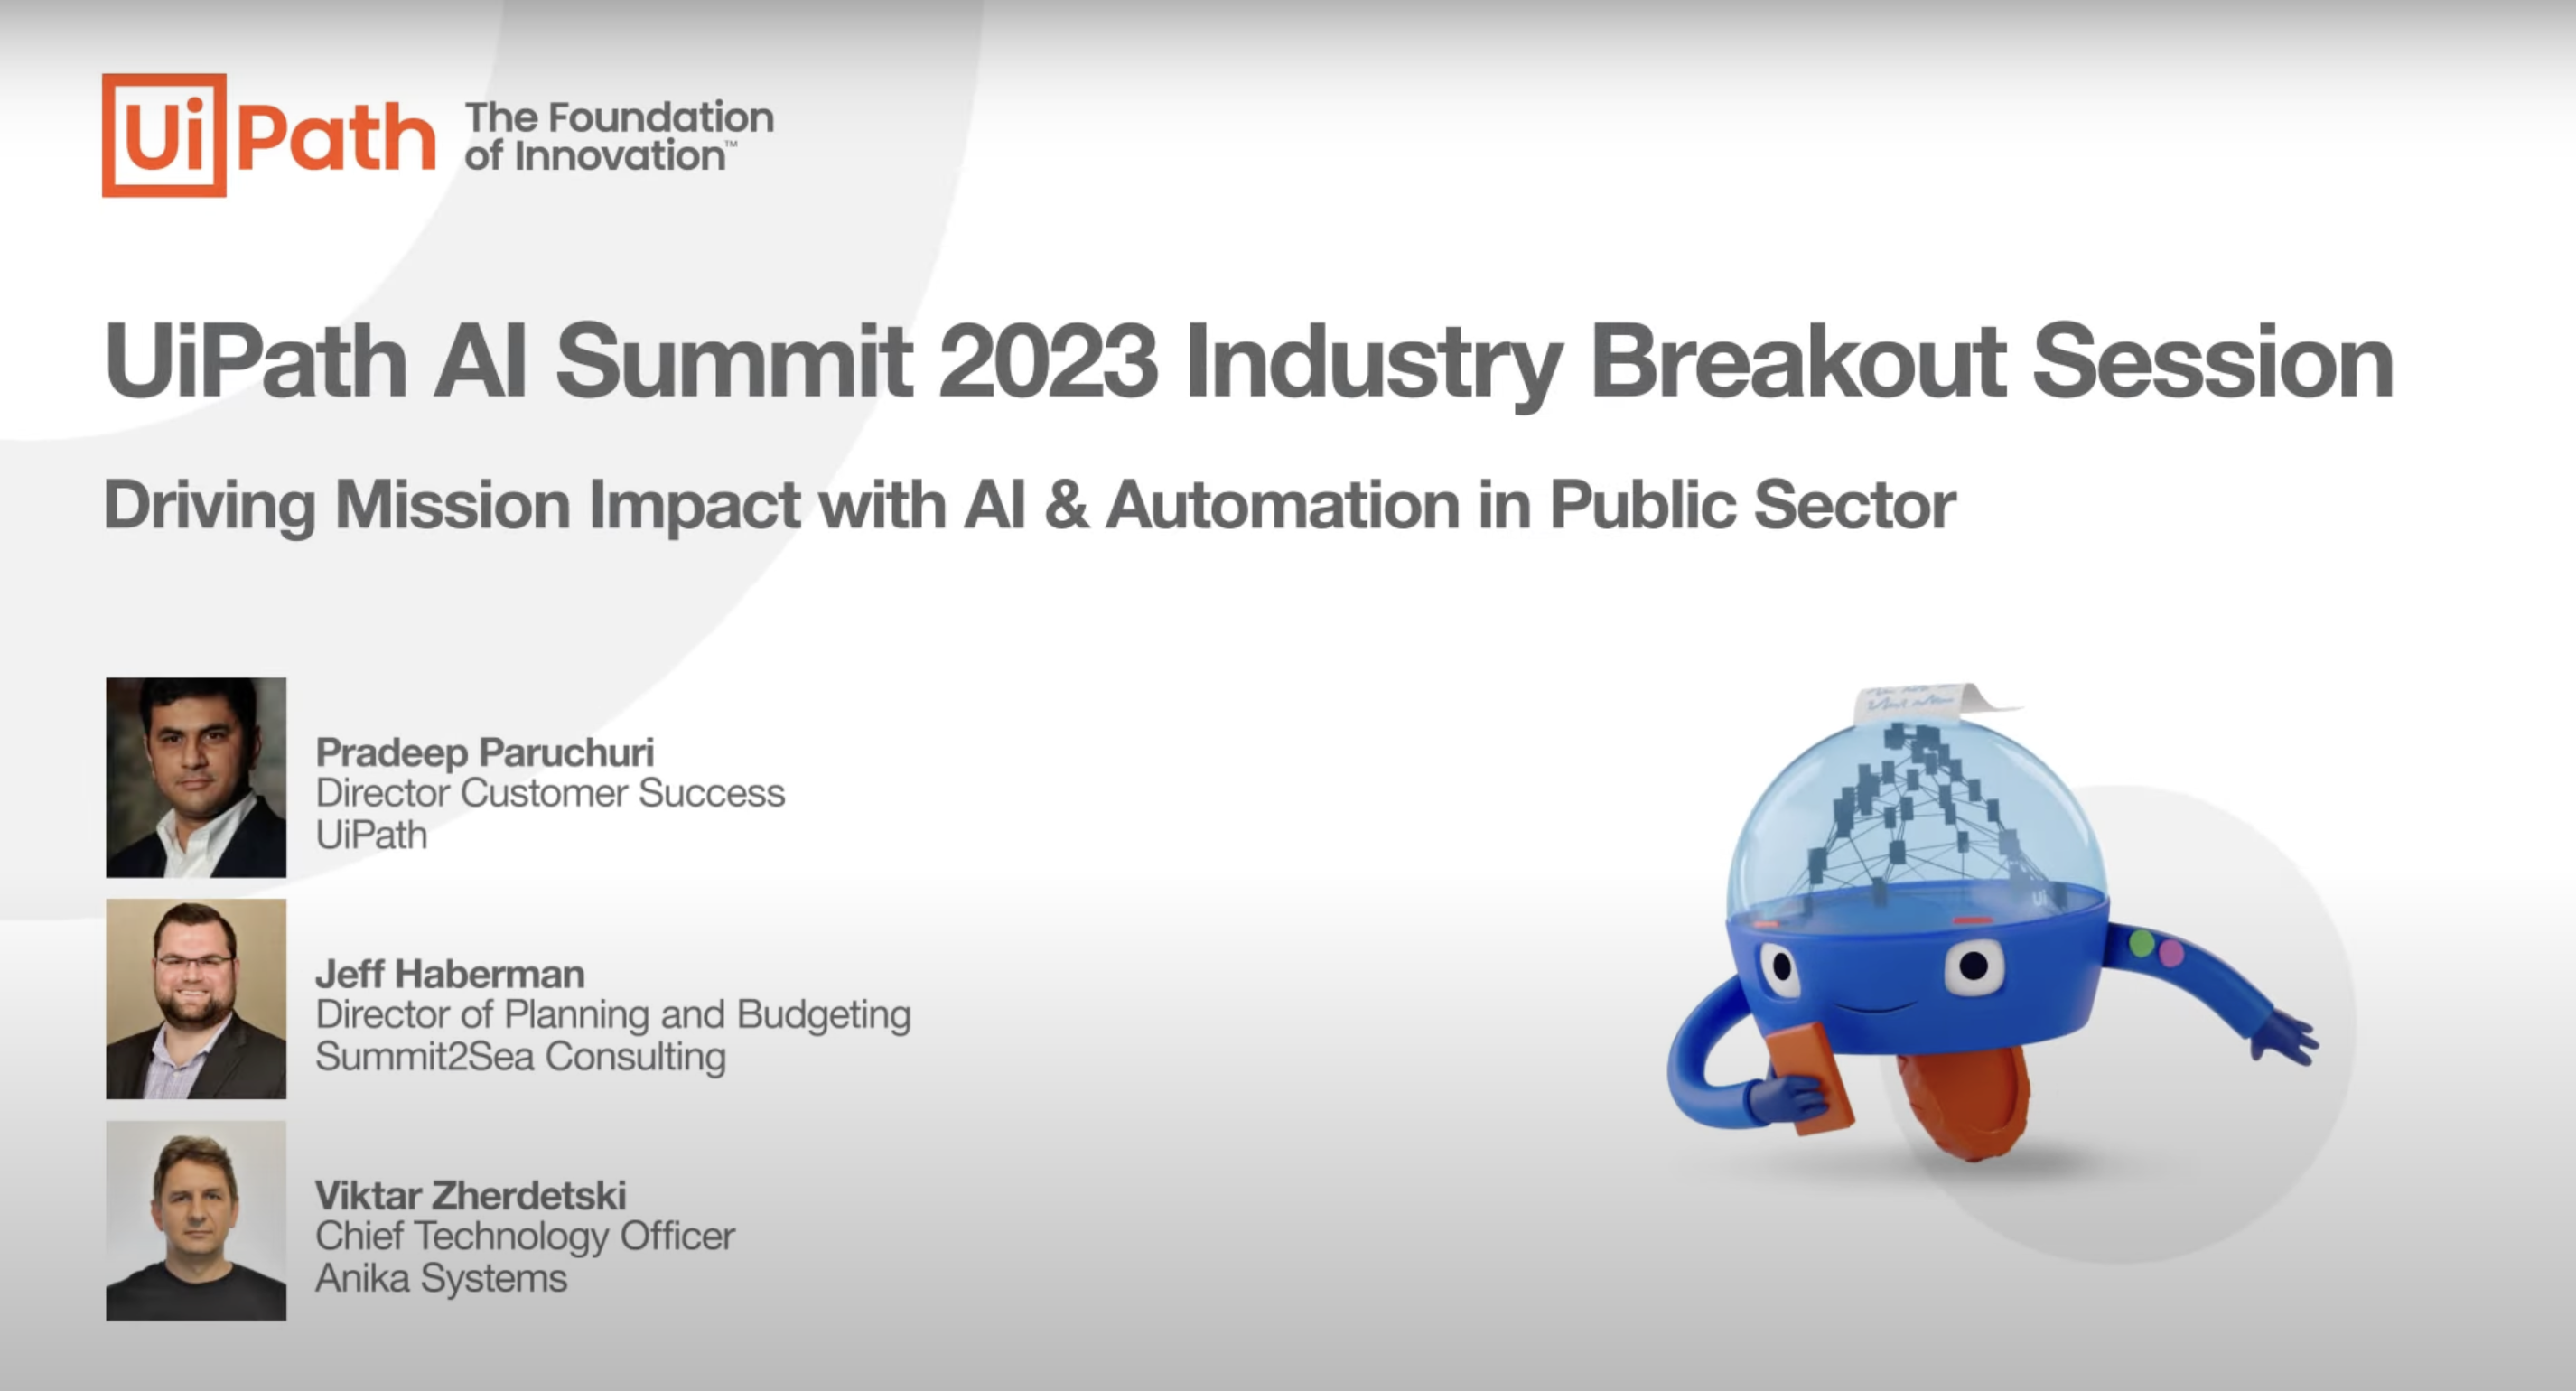 Highlights from UiPath AI Summit 2023 Industry Breakout Session Public Sector